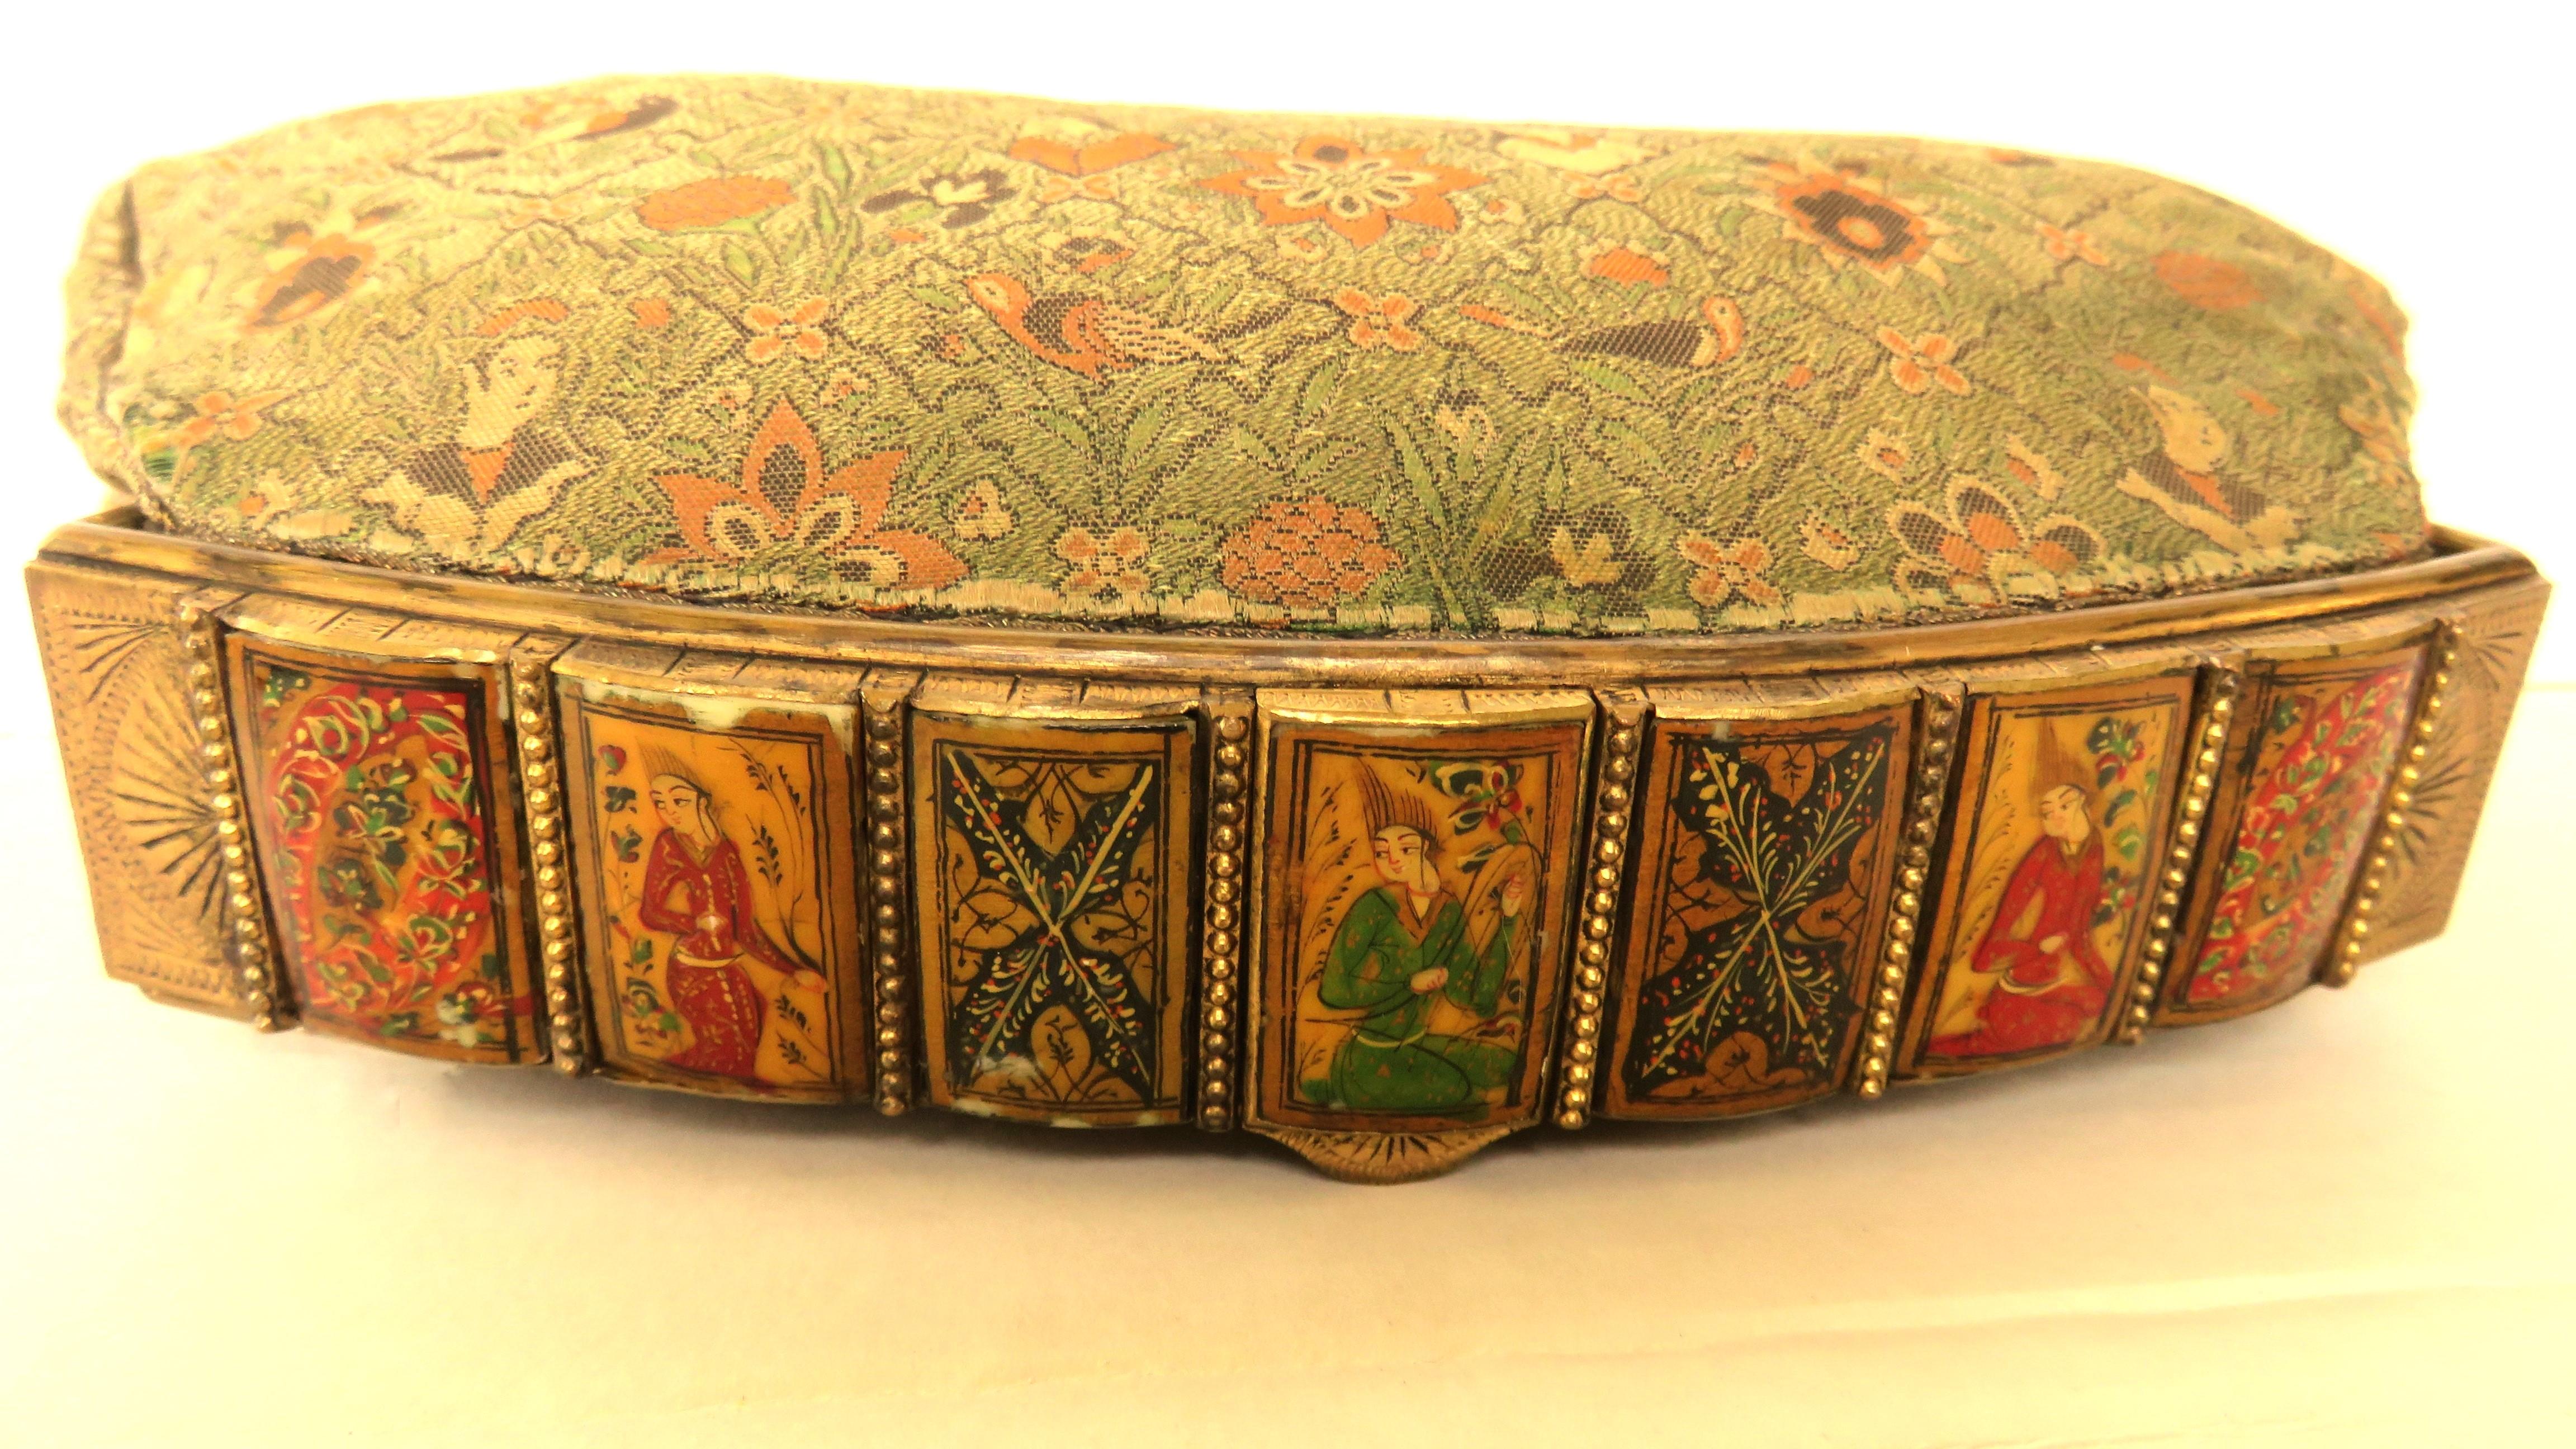 Asian Figure Motif Brocade Clutch with Painted Figures Tile Top 1930s For Sale 9